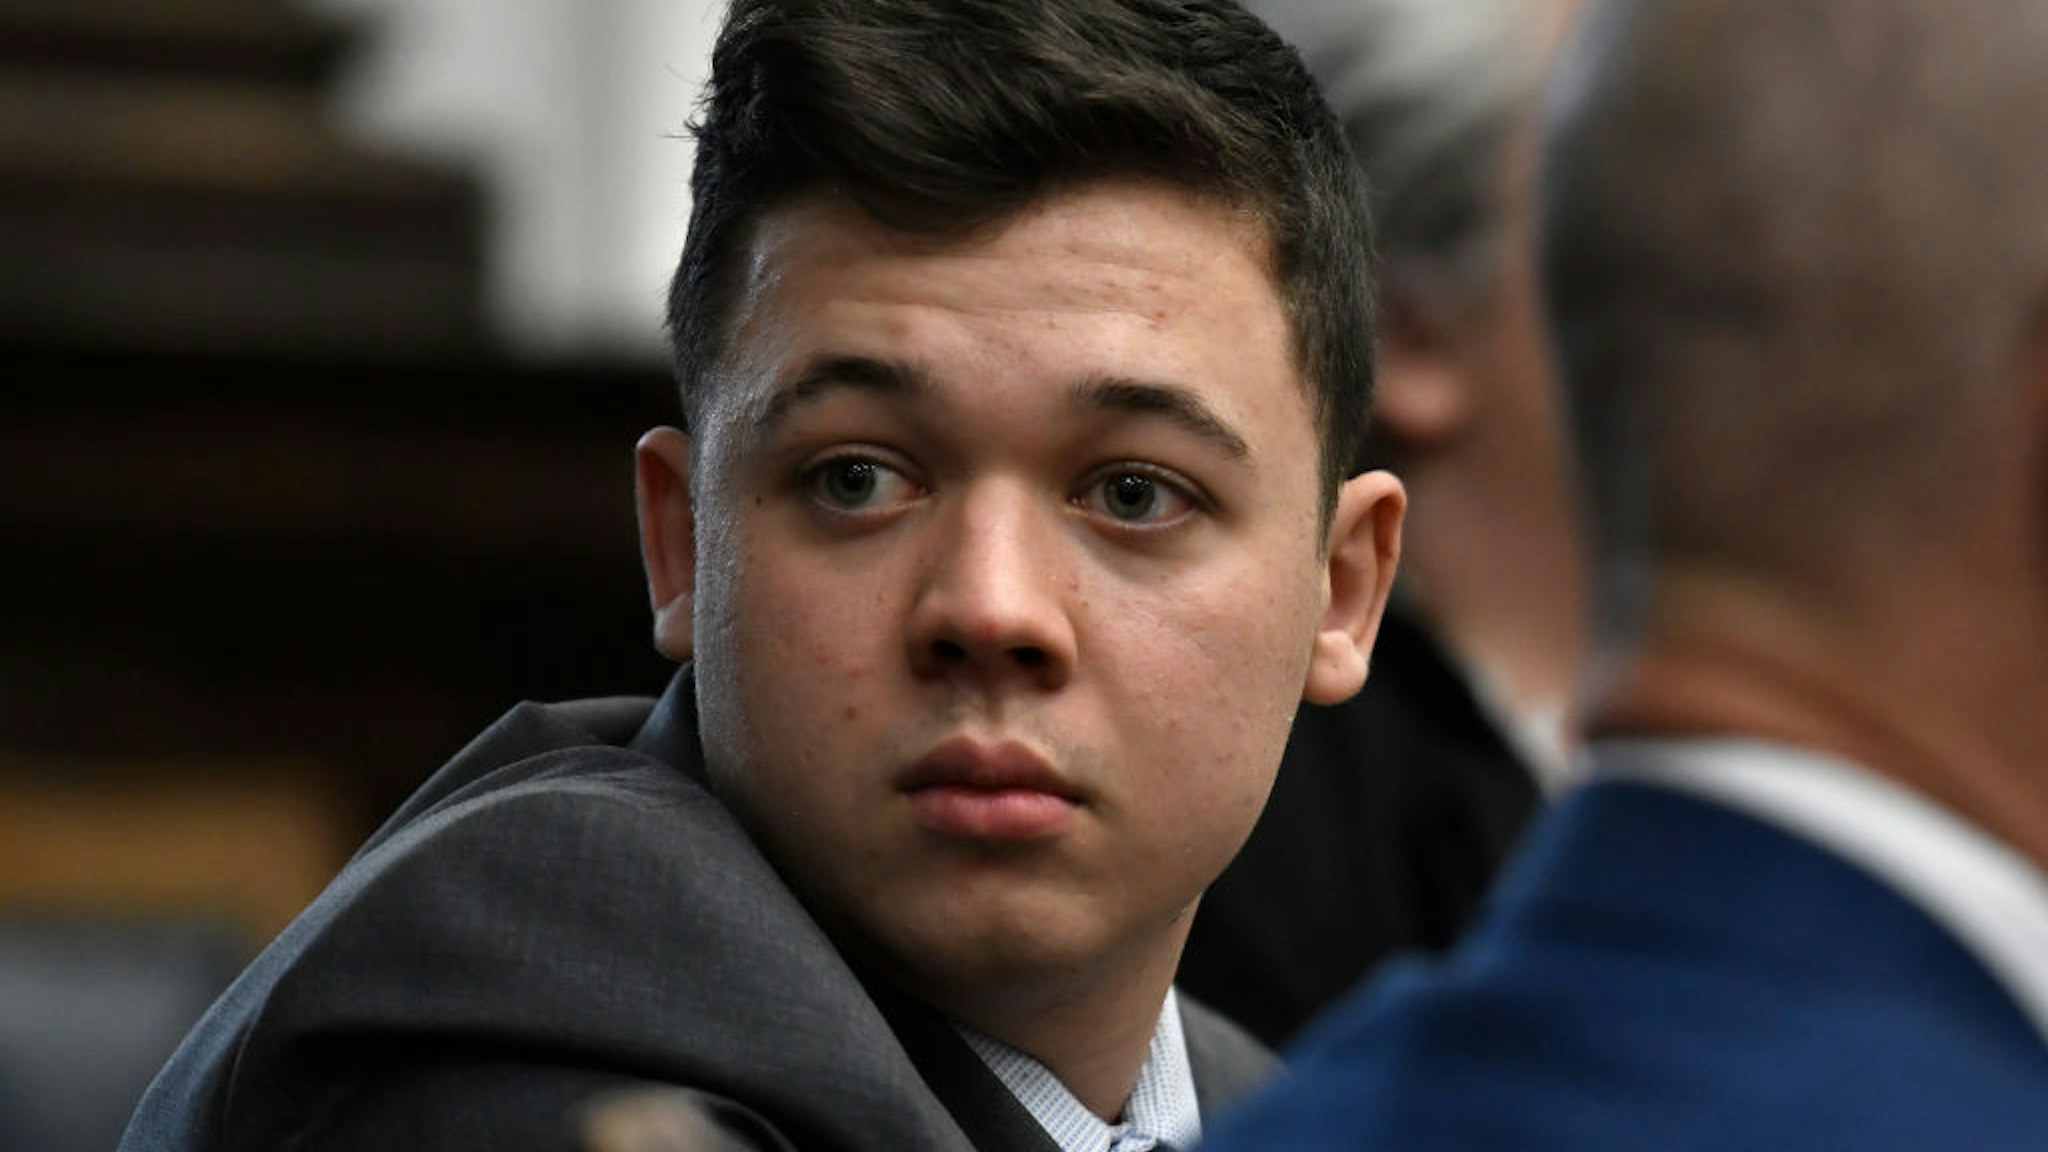 Kyle Rittenhouse looks back as attorneys discuss items in the motion for mistrial presented by his defense during his trial at the Kenosha County Courthouse on November 17, 2021 in Kenosha, Wisconsin.